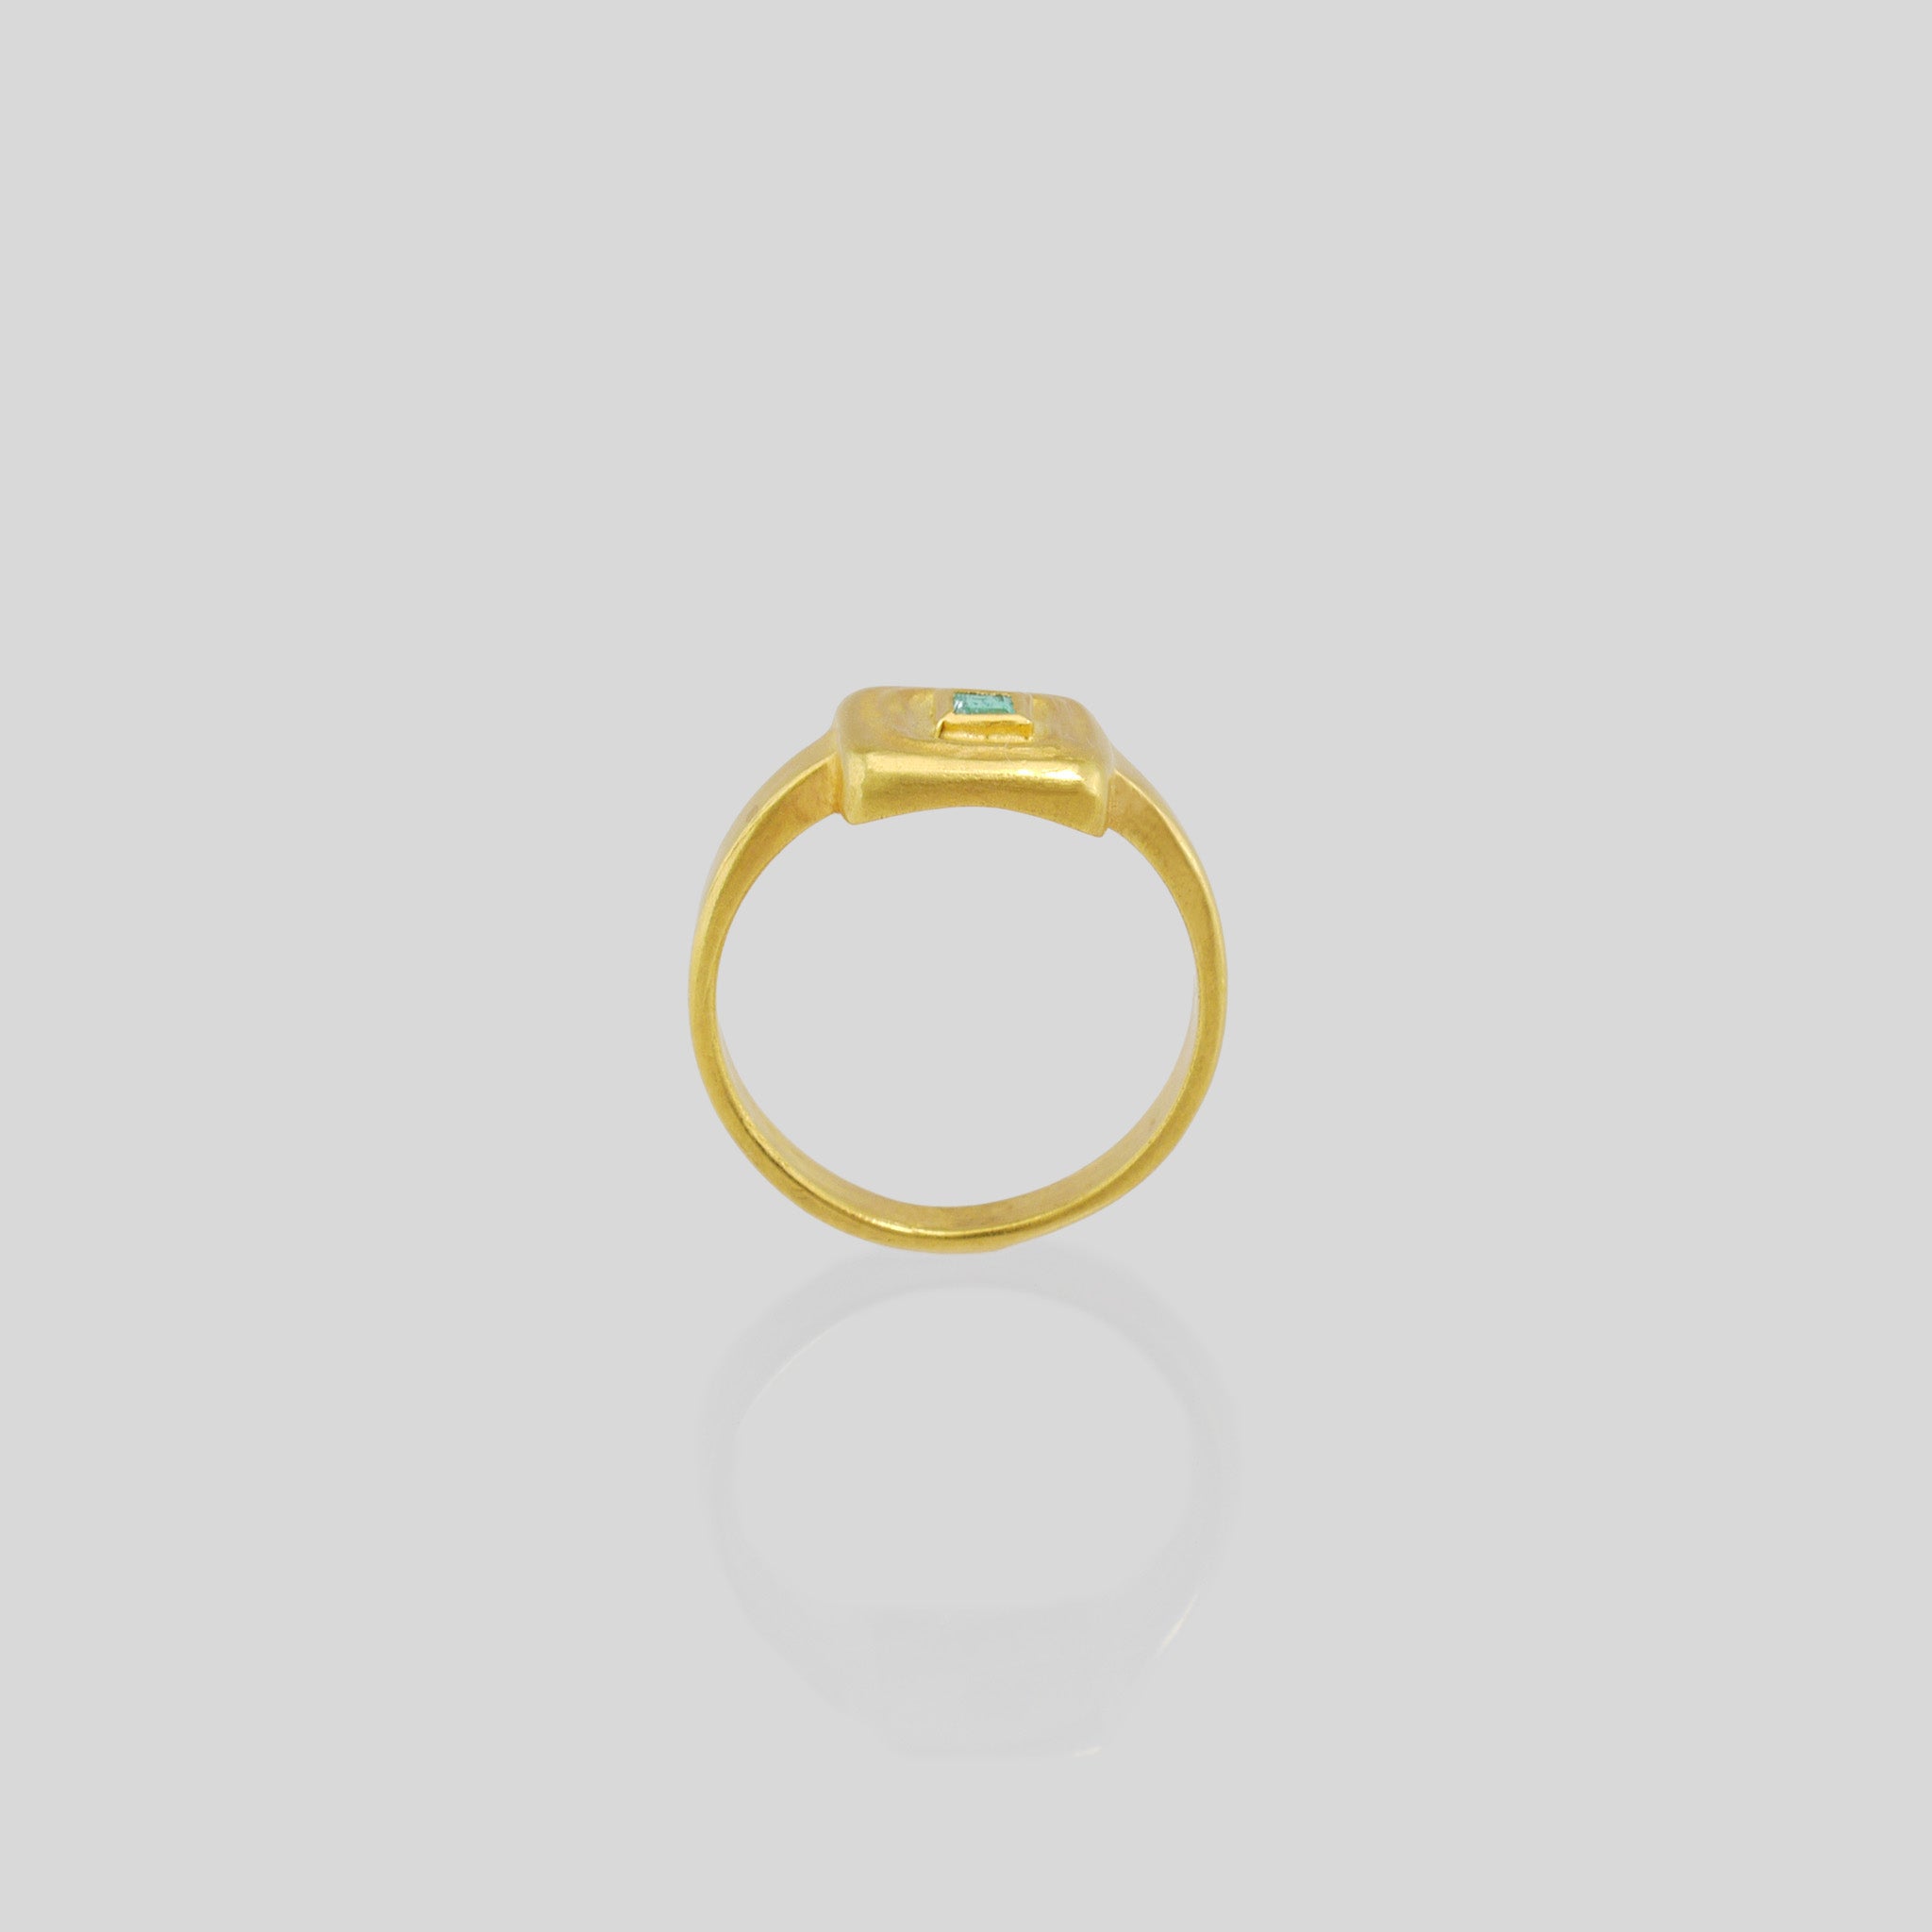 Side view of Handcrafted 18k Gold ring featuring a square Emerald set atop a square surface, evoking the ancient Egyptian era's golden jewelry of the Pharaohs.